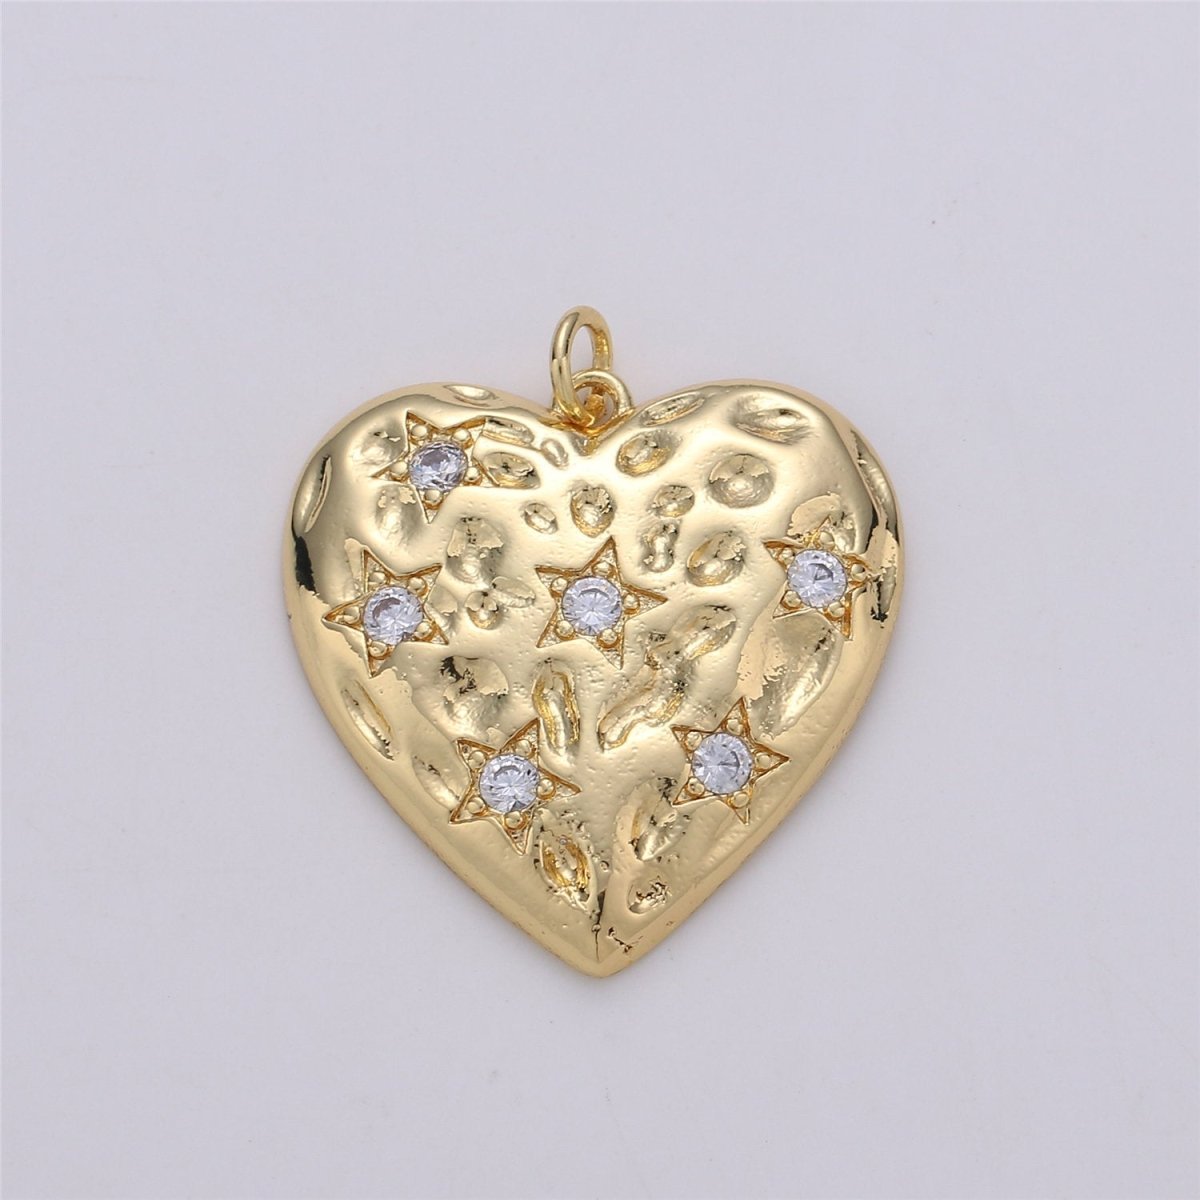 24K Gold Filled Rustic Textured Heart Charm with Micro Pave Little Star Shape Cubic Zirconia CZ Stone for Love Necklace or Bracelet C-864 - DLUXCA